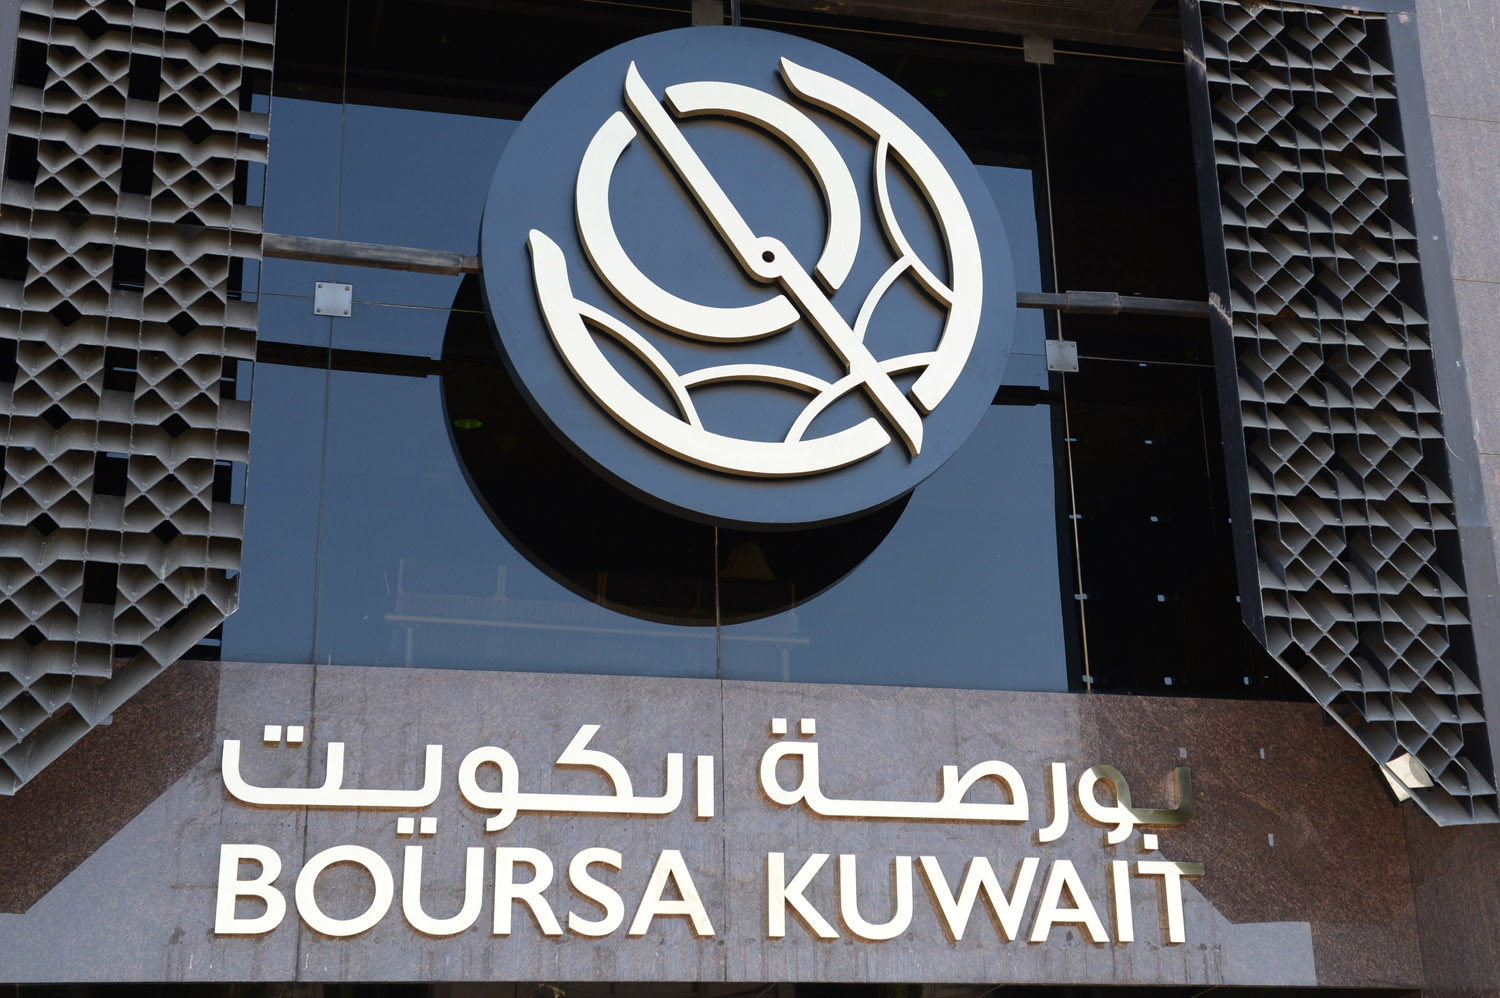 Boursa Kuwait ends Sunday in red zone                                                                                                                                                                                                                     